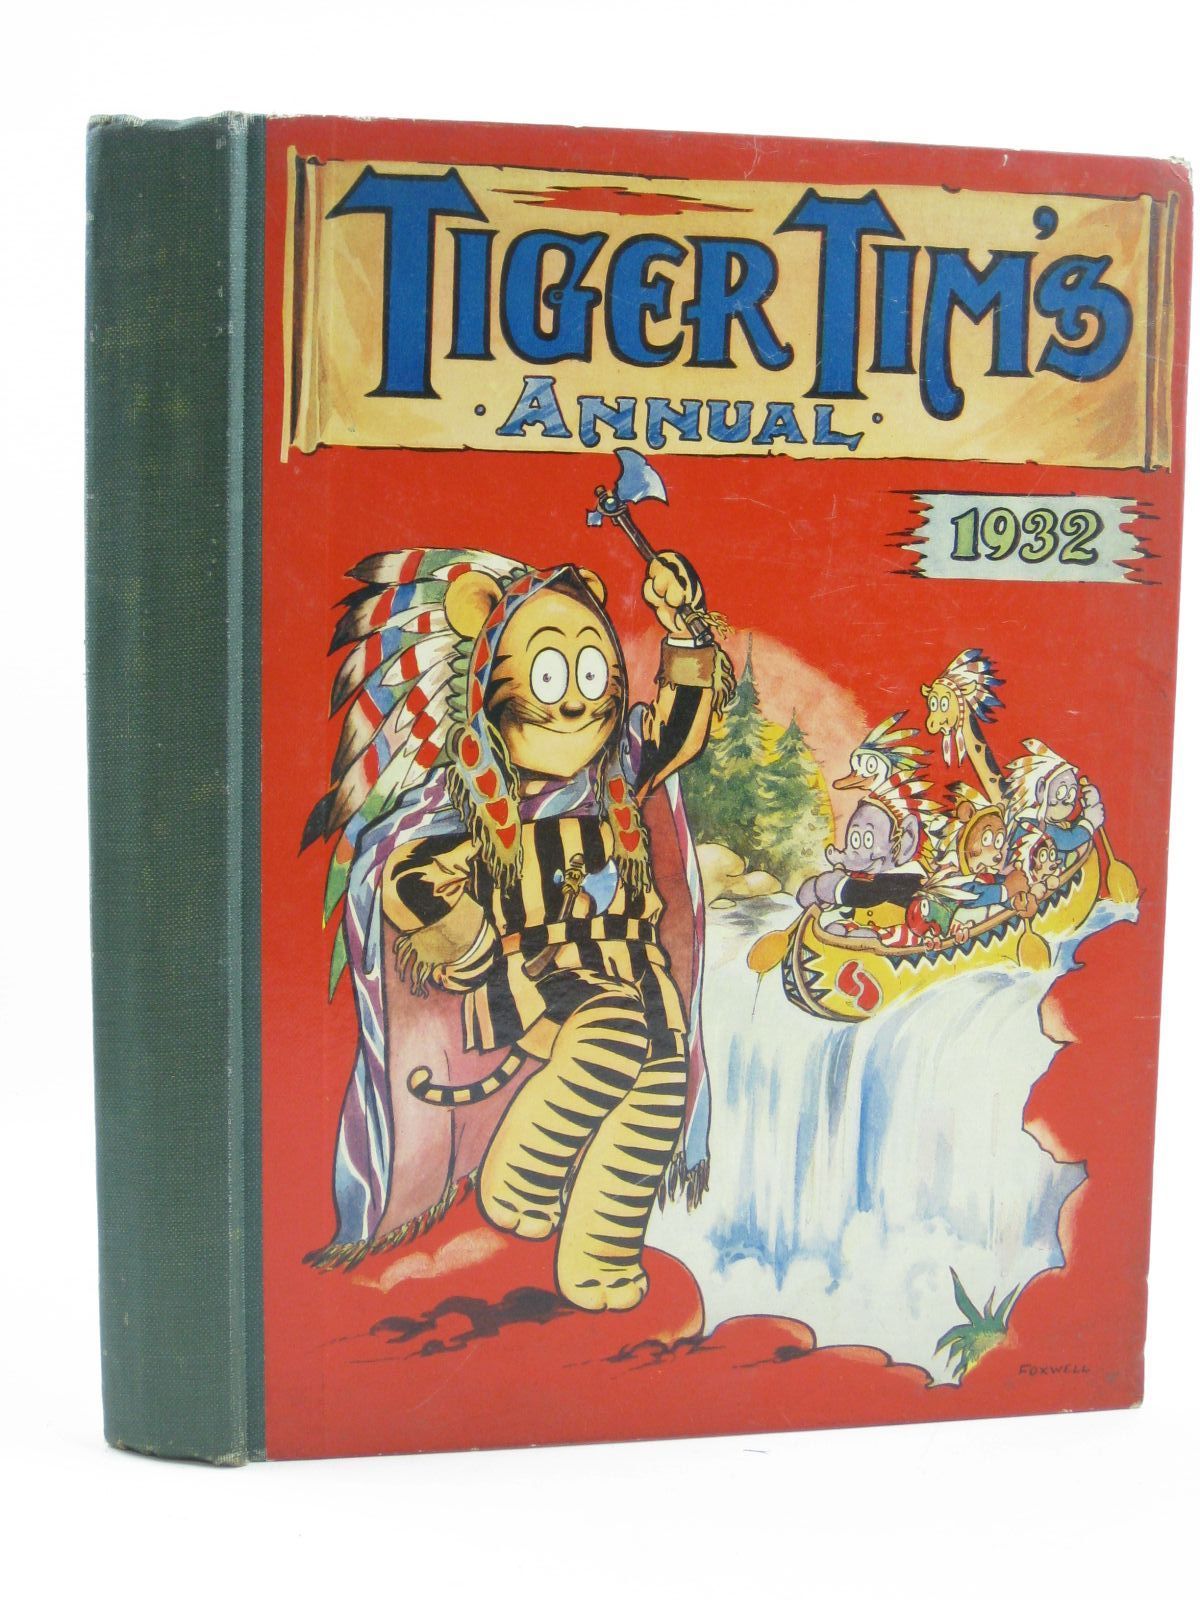 Photo of TIGER TIM'S ANNUAL 1932 illustrated by Foxwell, Herbert Mccready, H. et al., published by The Amalgamated Press (STOCK CODE: 1507147)  for sale by Stella & Rose's Books